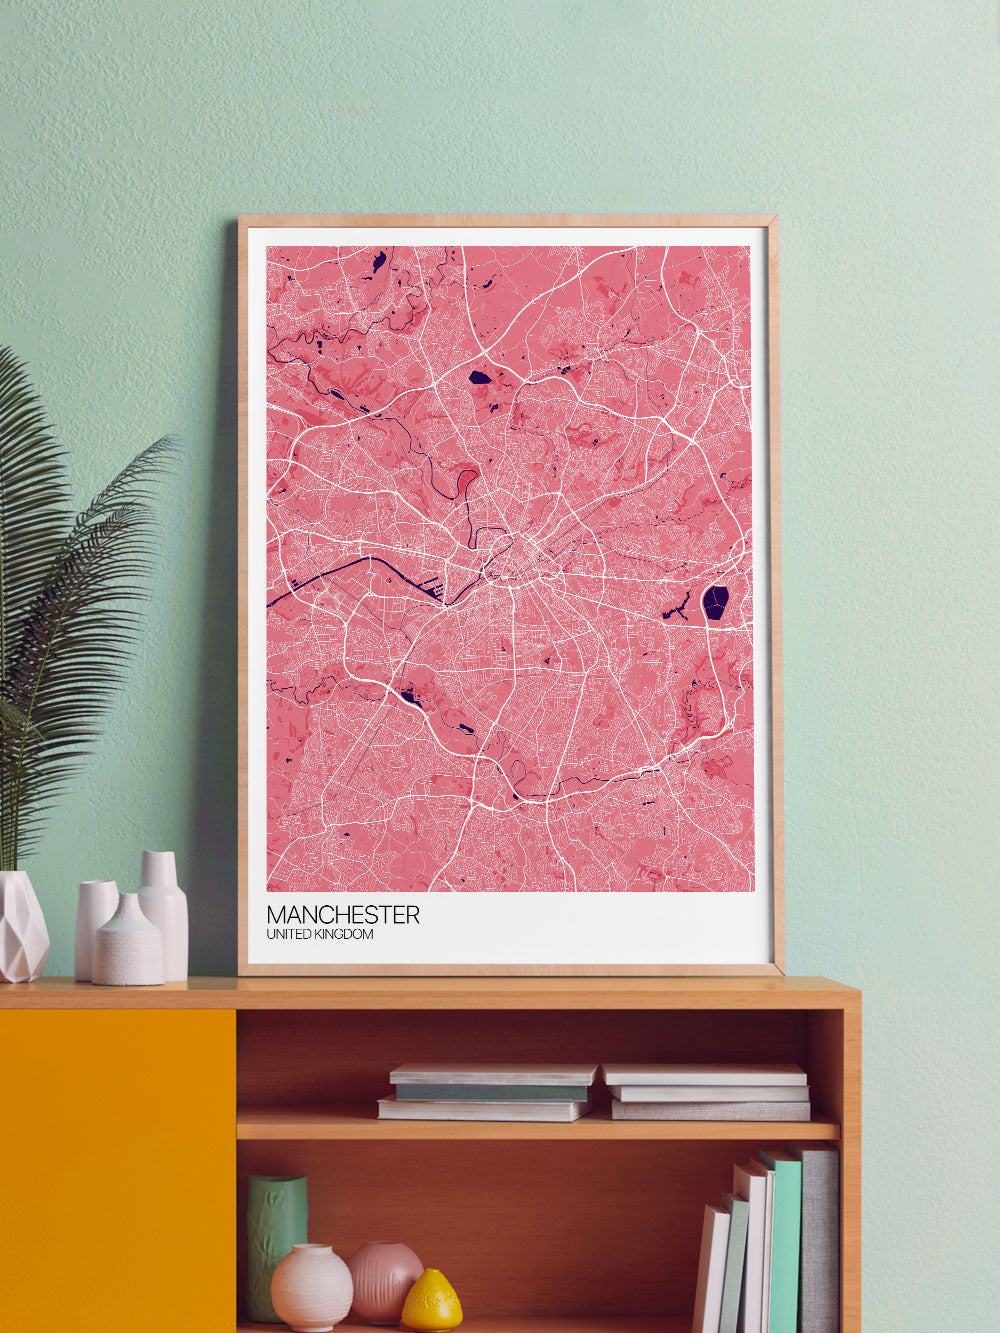 Manchester City Map Print in a frame on a shelf